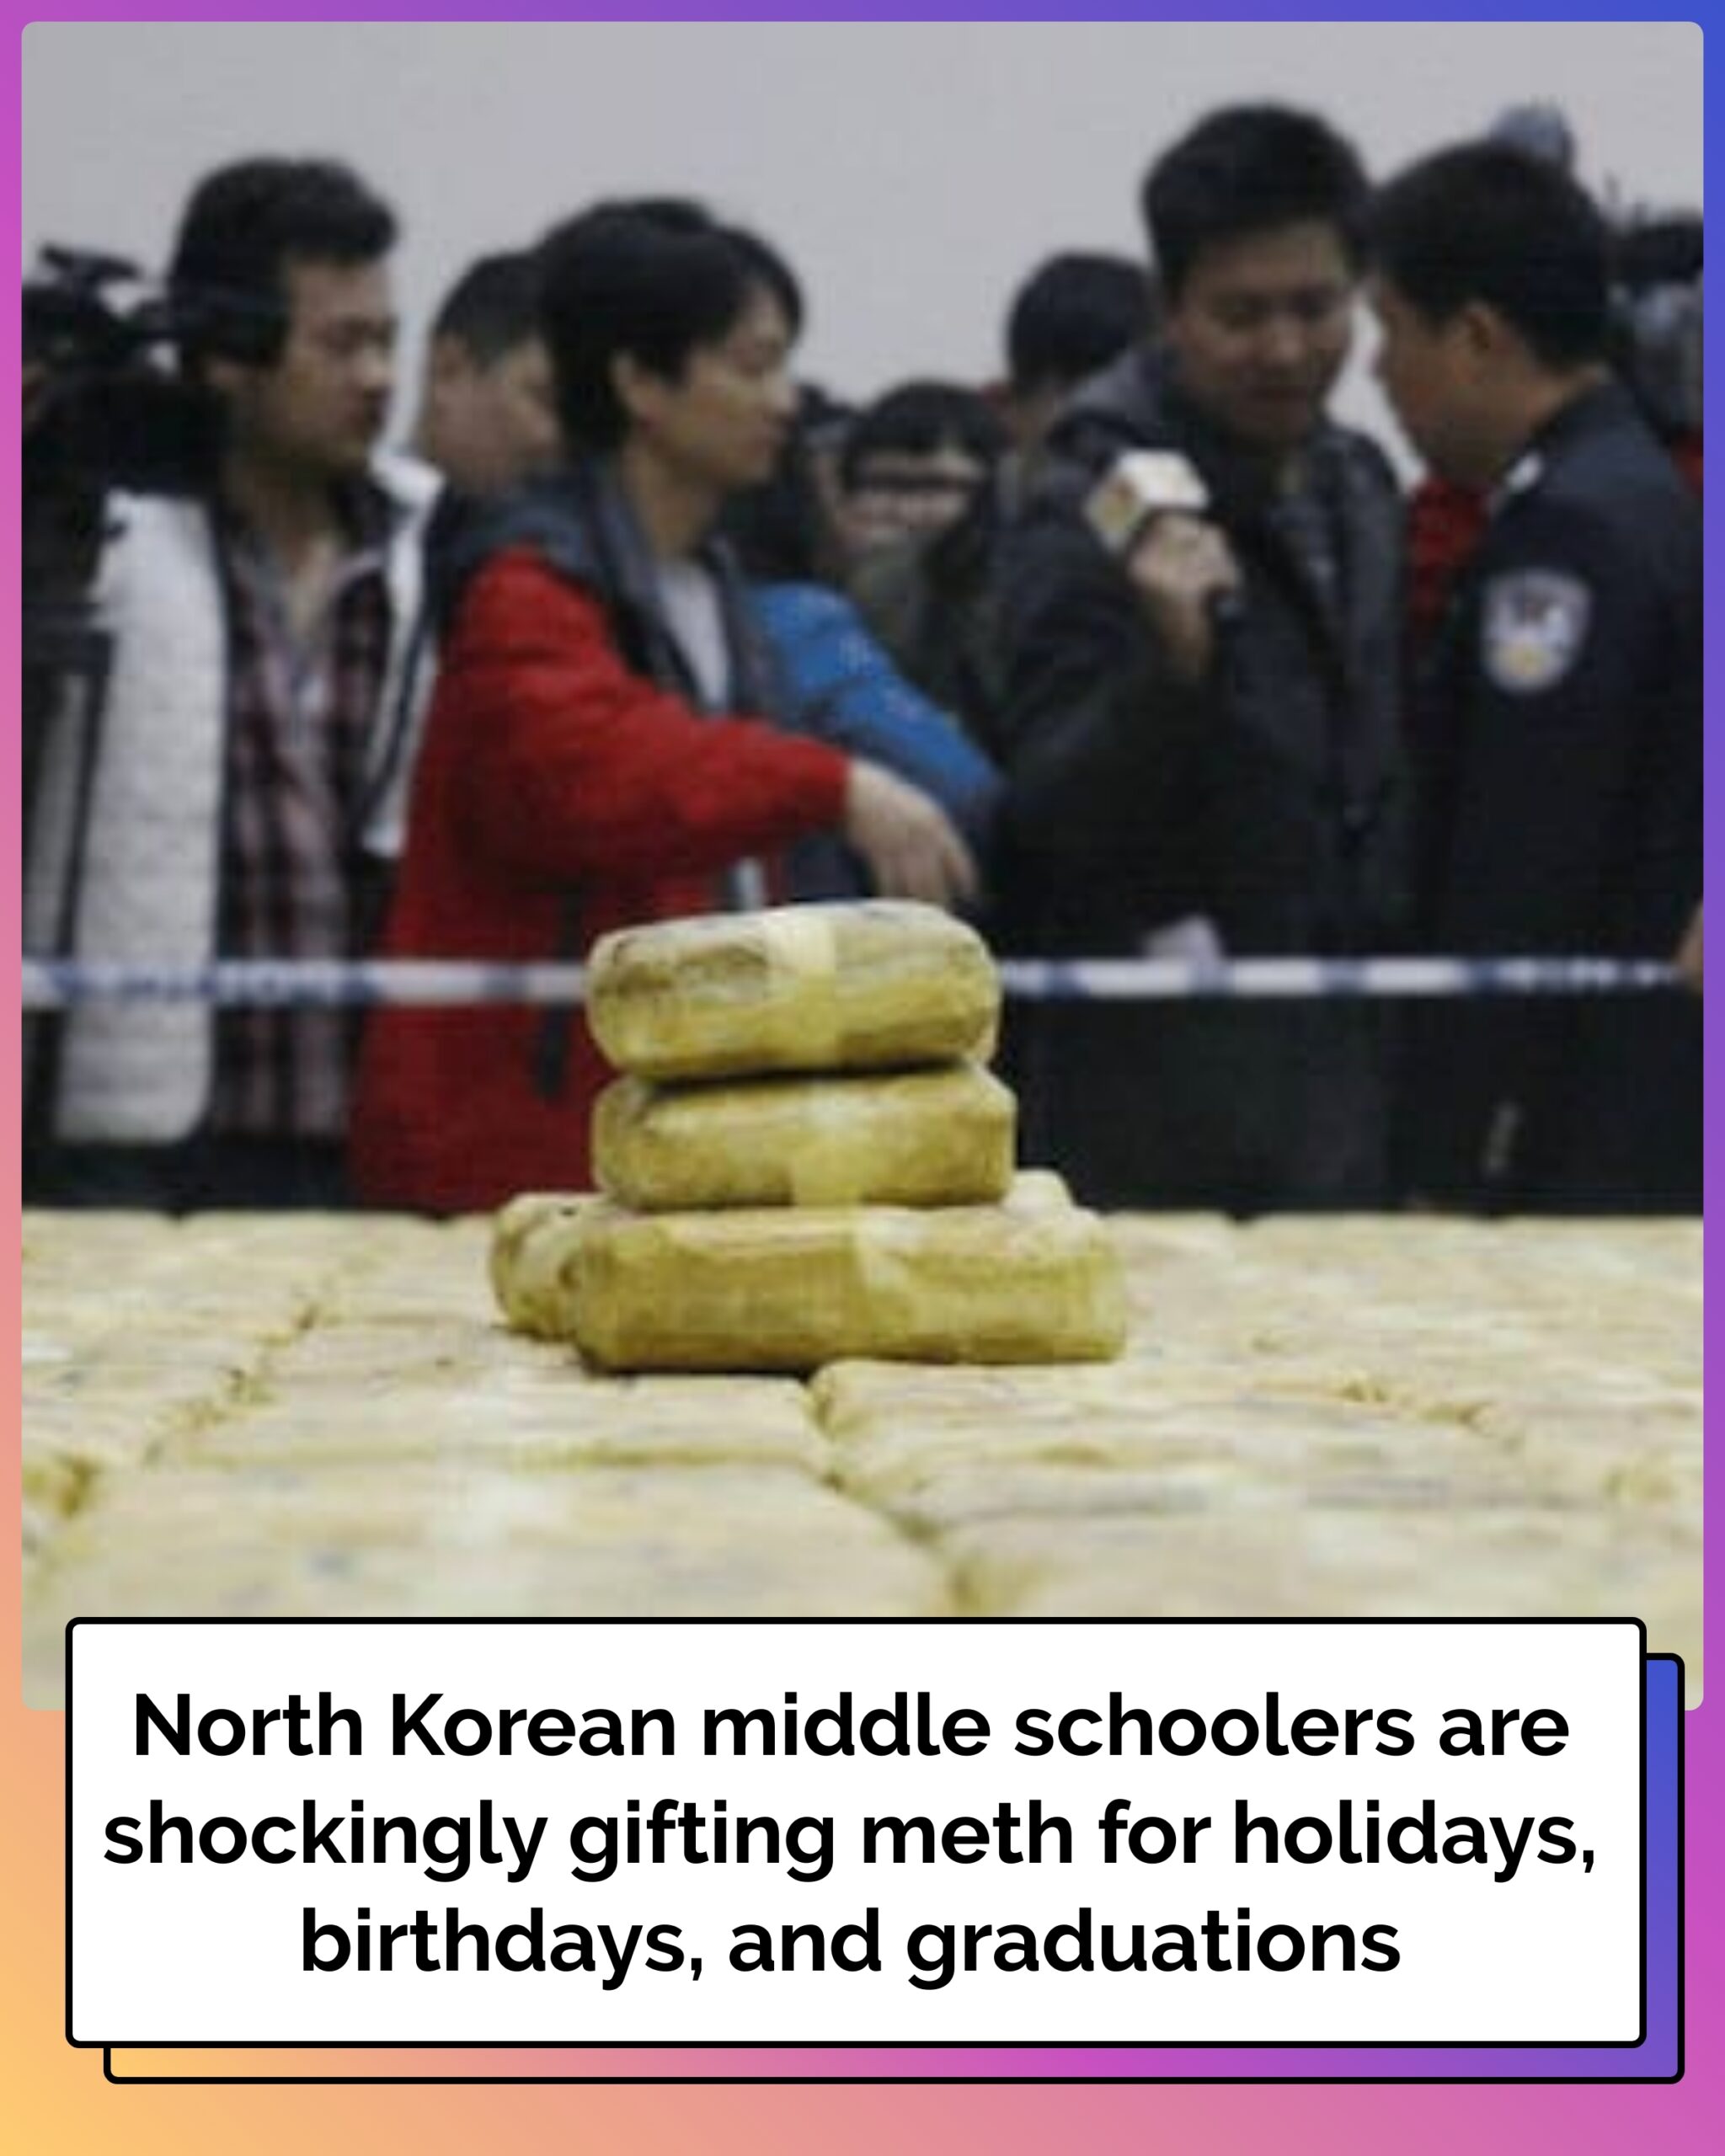 North Korean Middle Schoolers Are Gifting Each Other Meth For Holidays, Birthdays, And Graduations